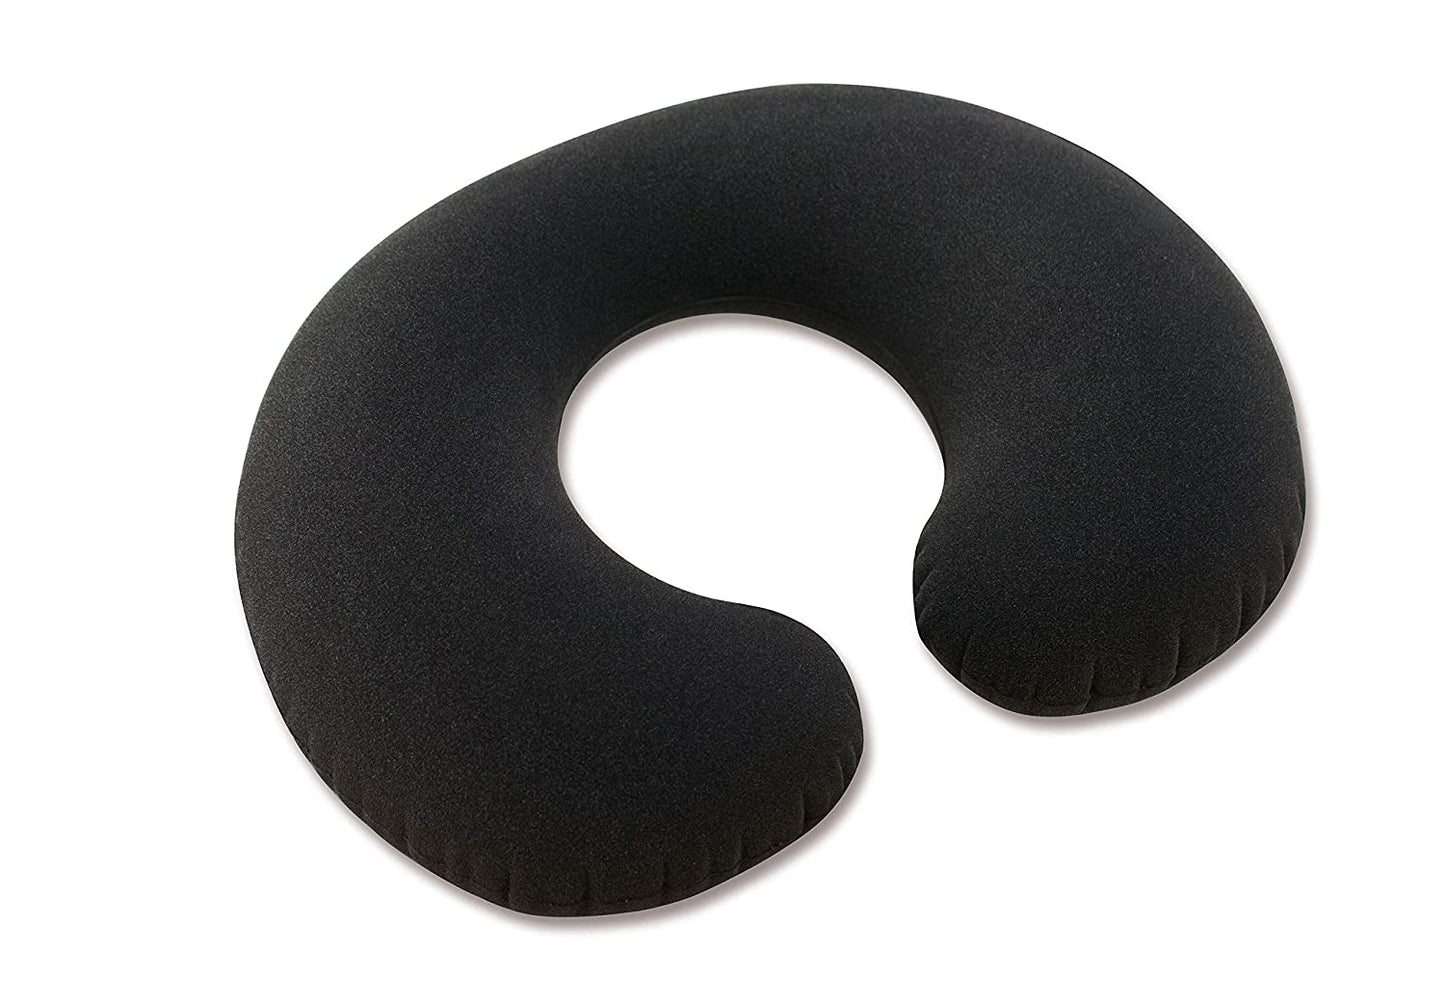 Intex Air Pillow U Shape Neck Support for Travel Journeys (Color May Vary)